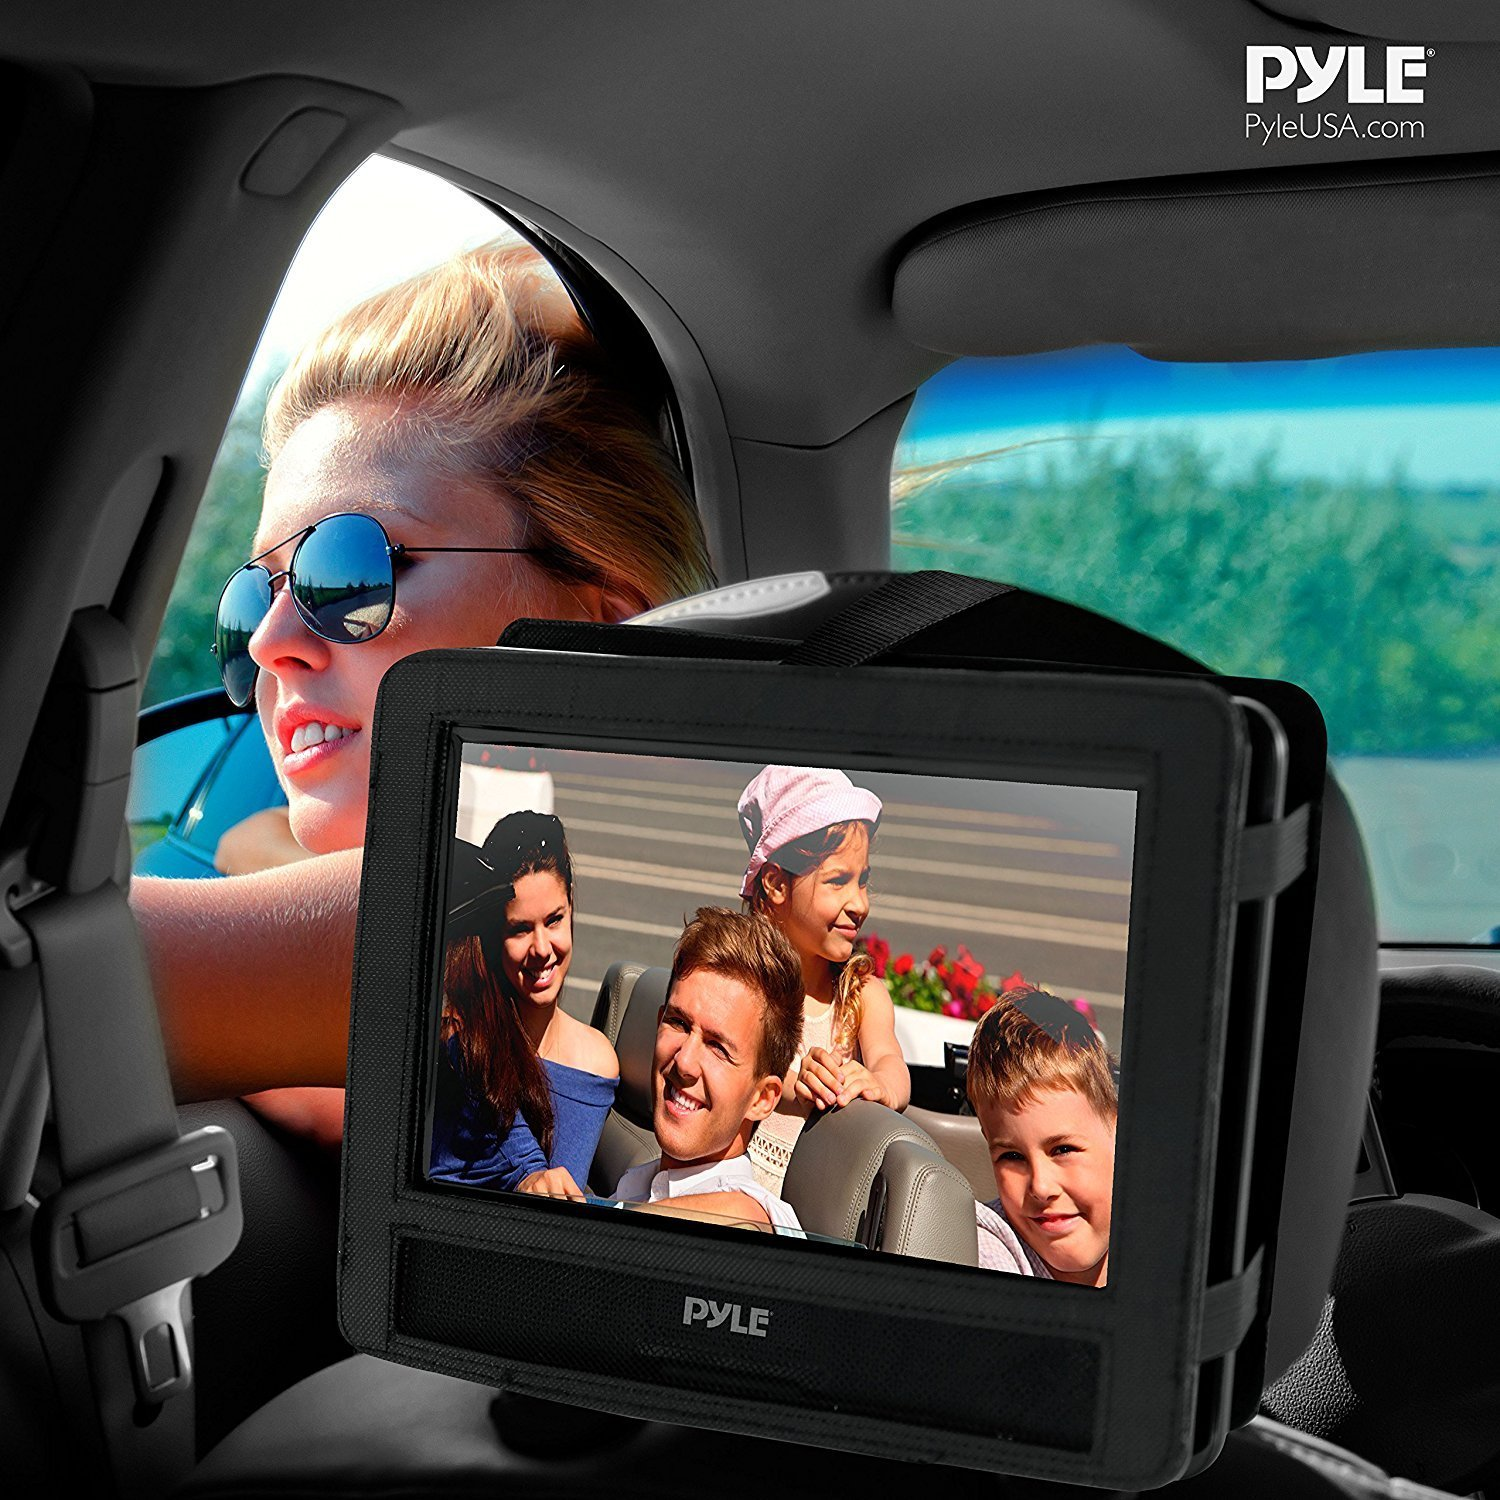 PyleHome 14'' Portable CD/DVD Player, Hi-Re Widescreen Display with Rechargeable Battery (PDH14)